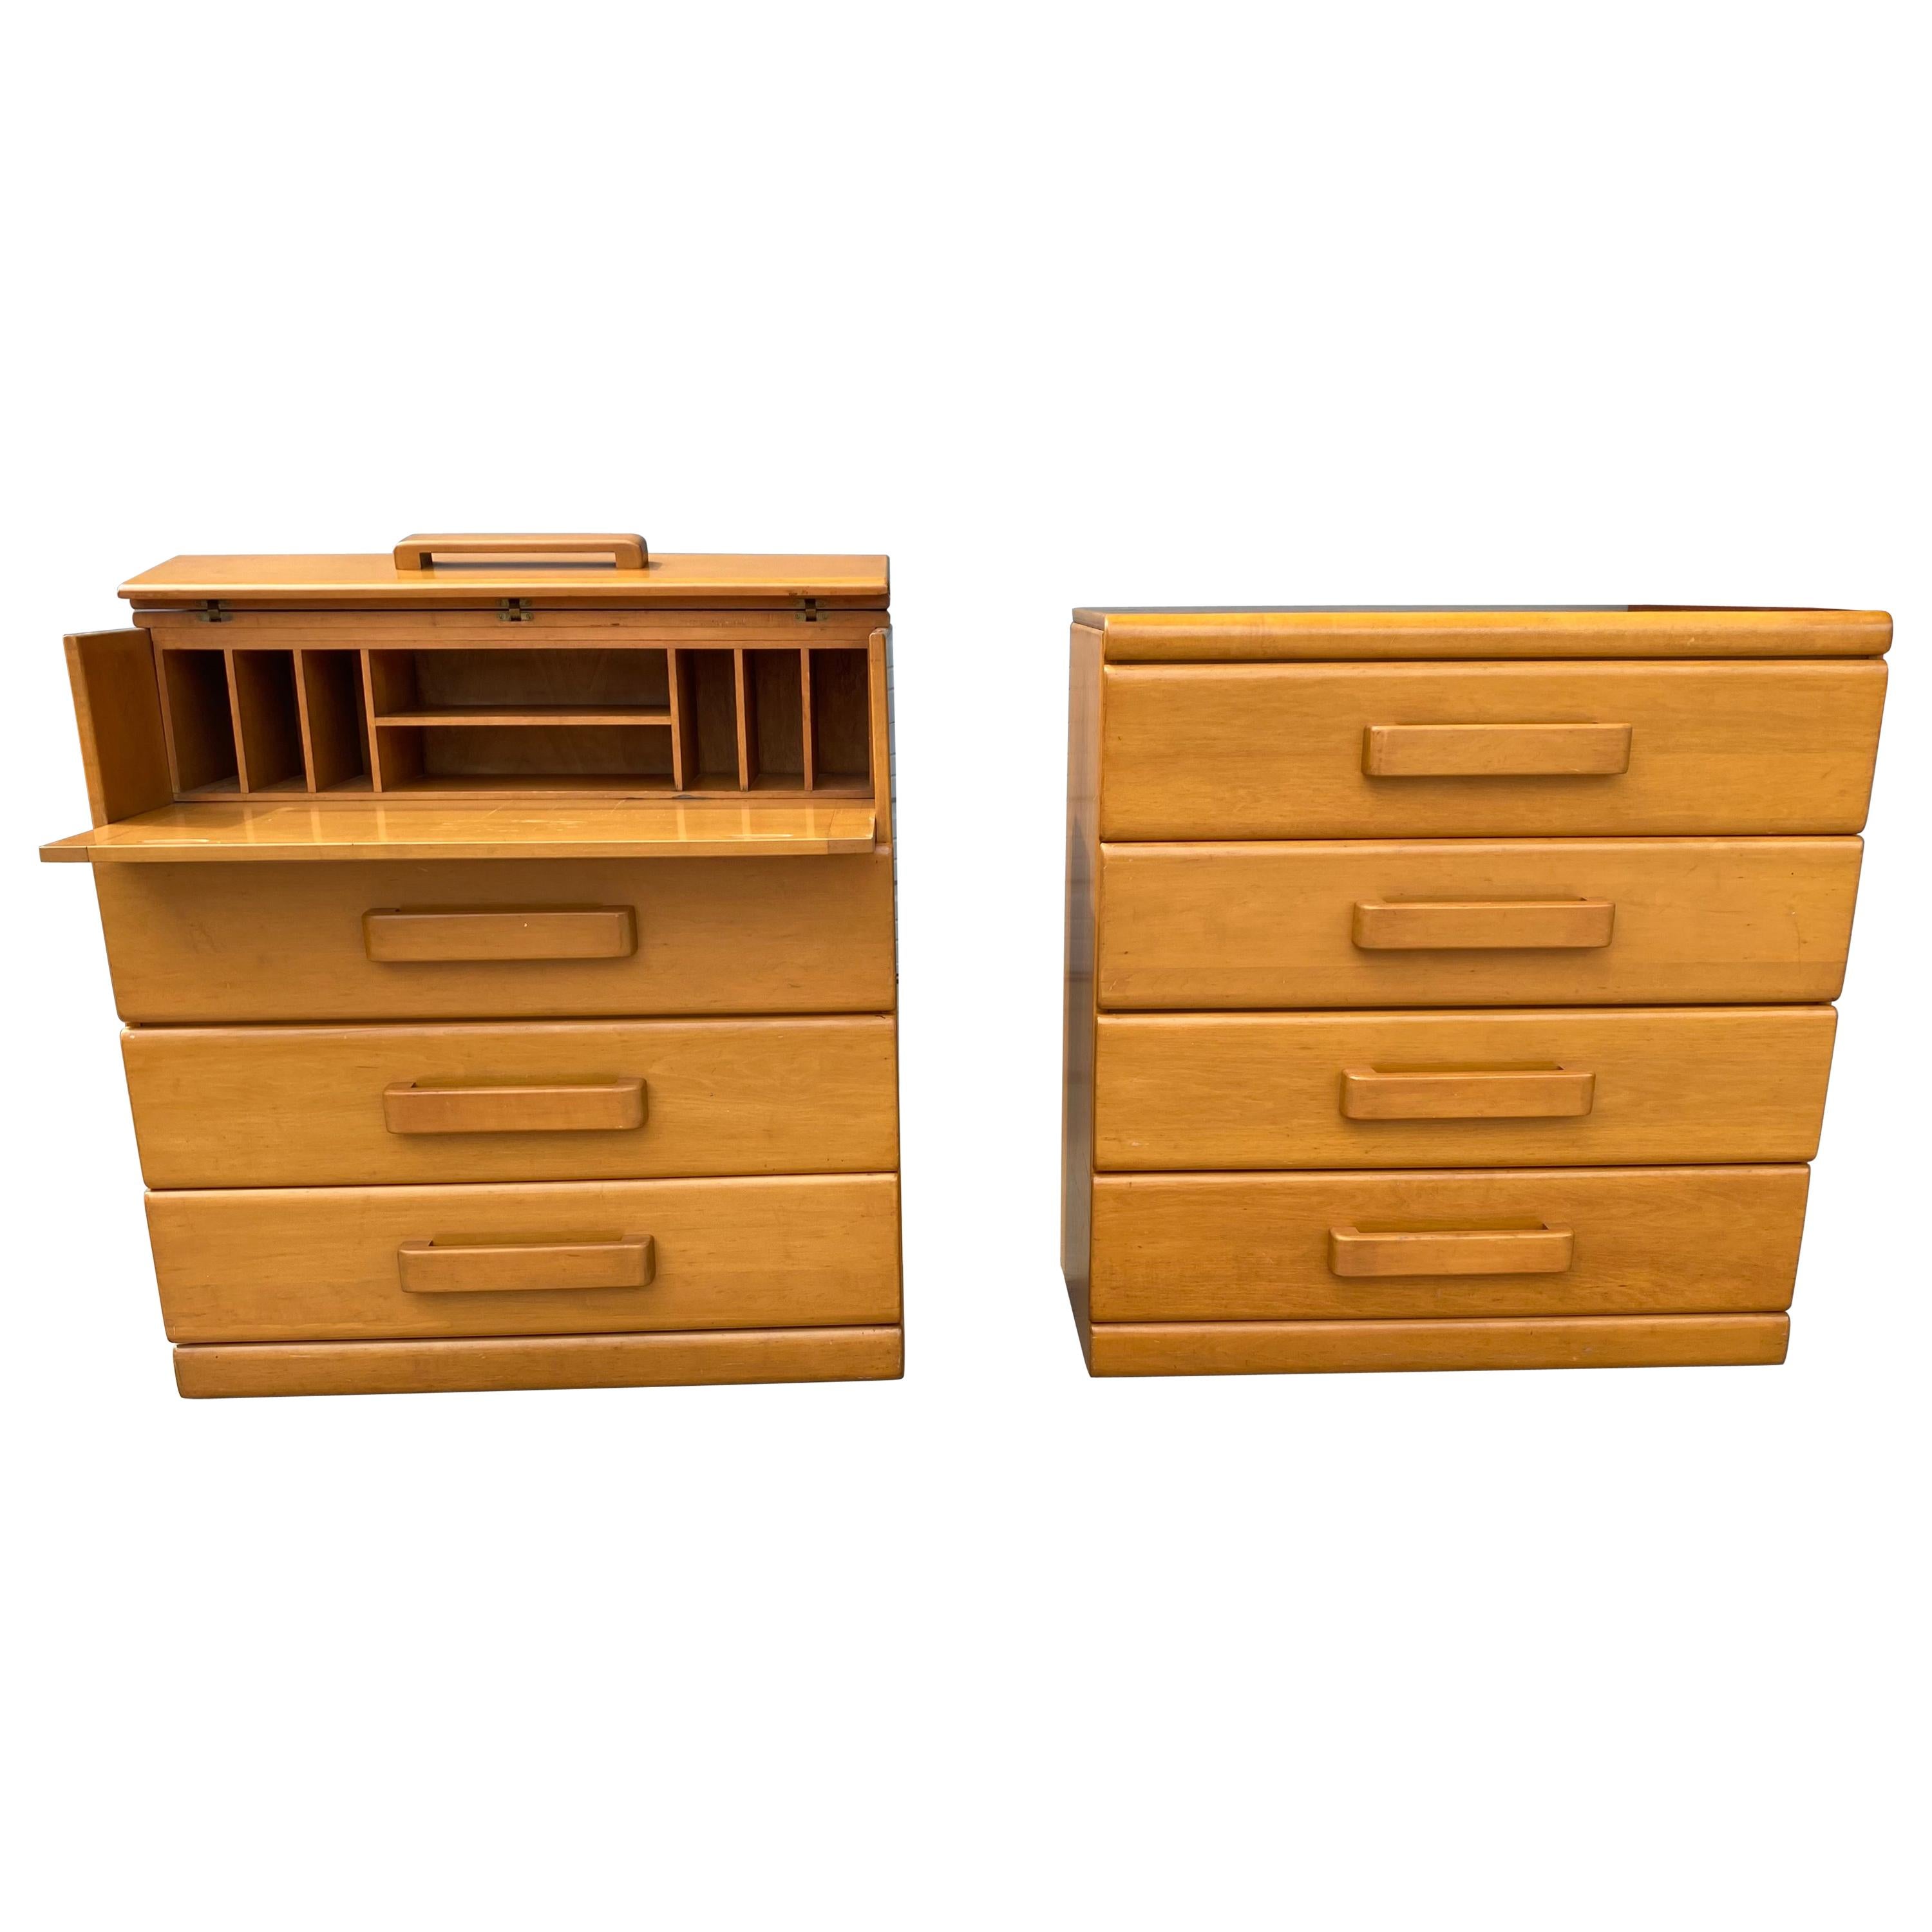 Pair of American Modern 4 Drawer Chests / Desk, Russel Wright, Conant Ball